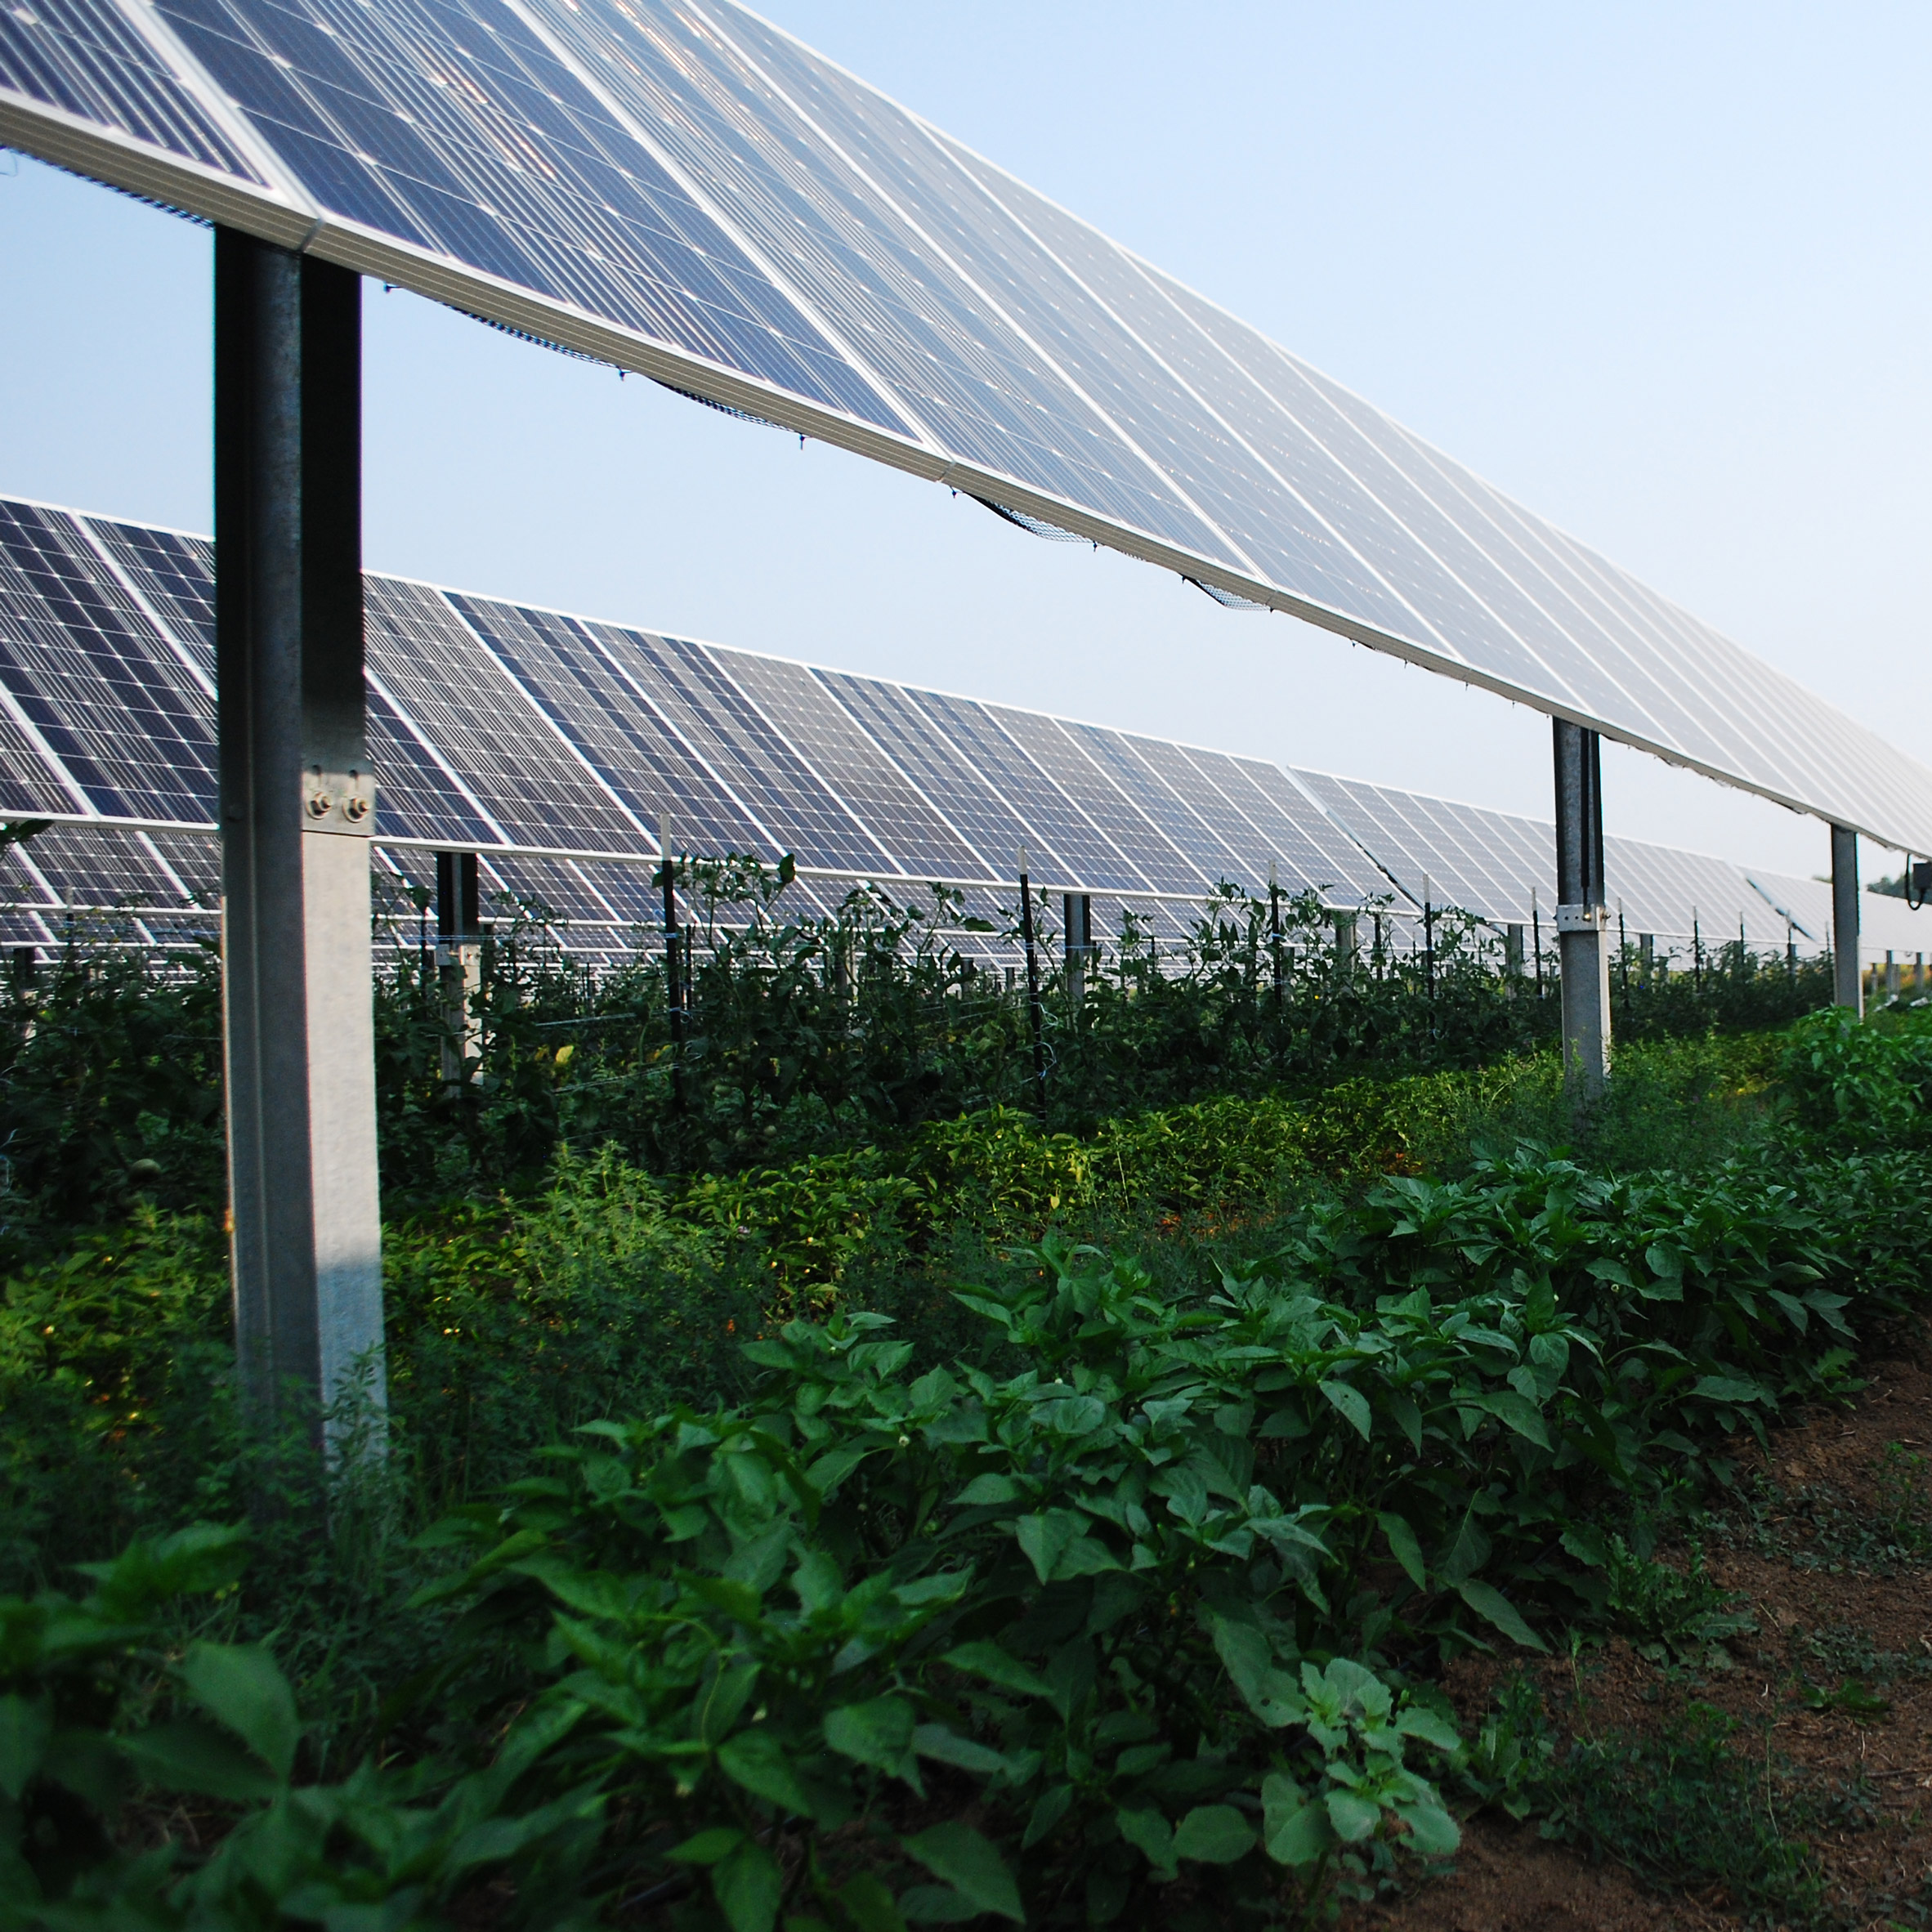 Agrivoltaic solar farms offer shocking benefits beyond producing energy